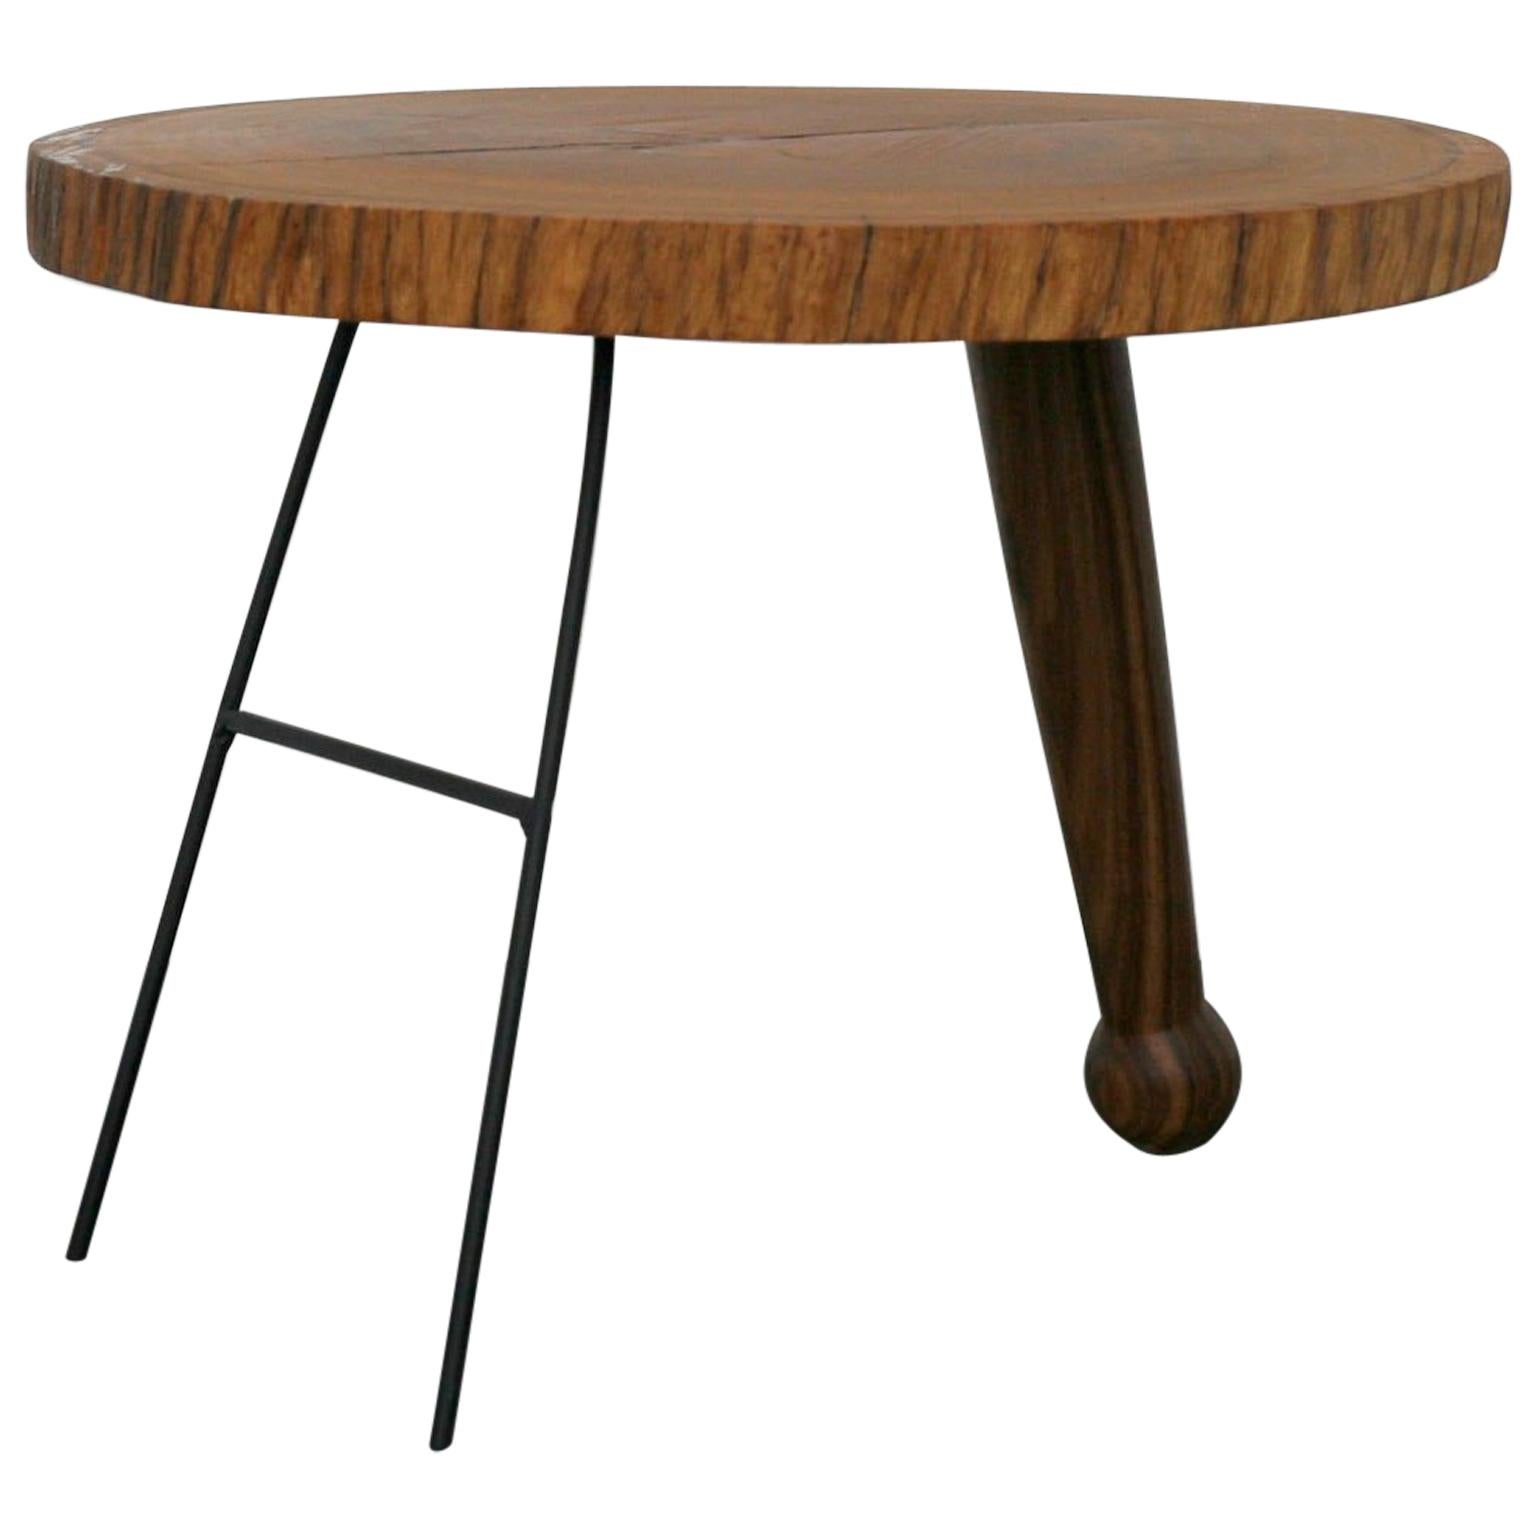 Kiaat wood and steel. Kiaat table top: tree trunk cut to 55mm thickness. Single leg of turned Kiaat, oiled with pure linseed oil, and additional coated steel supports.